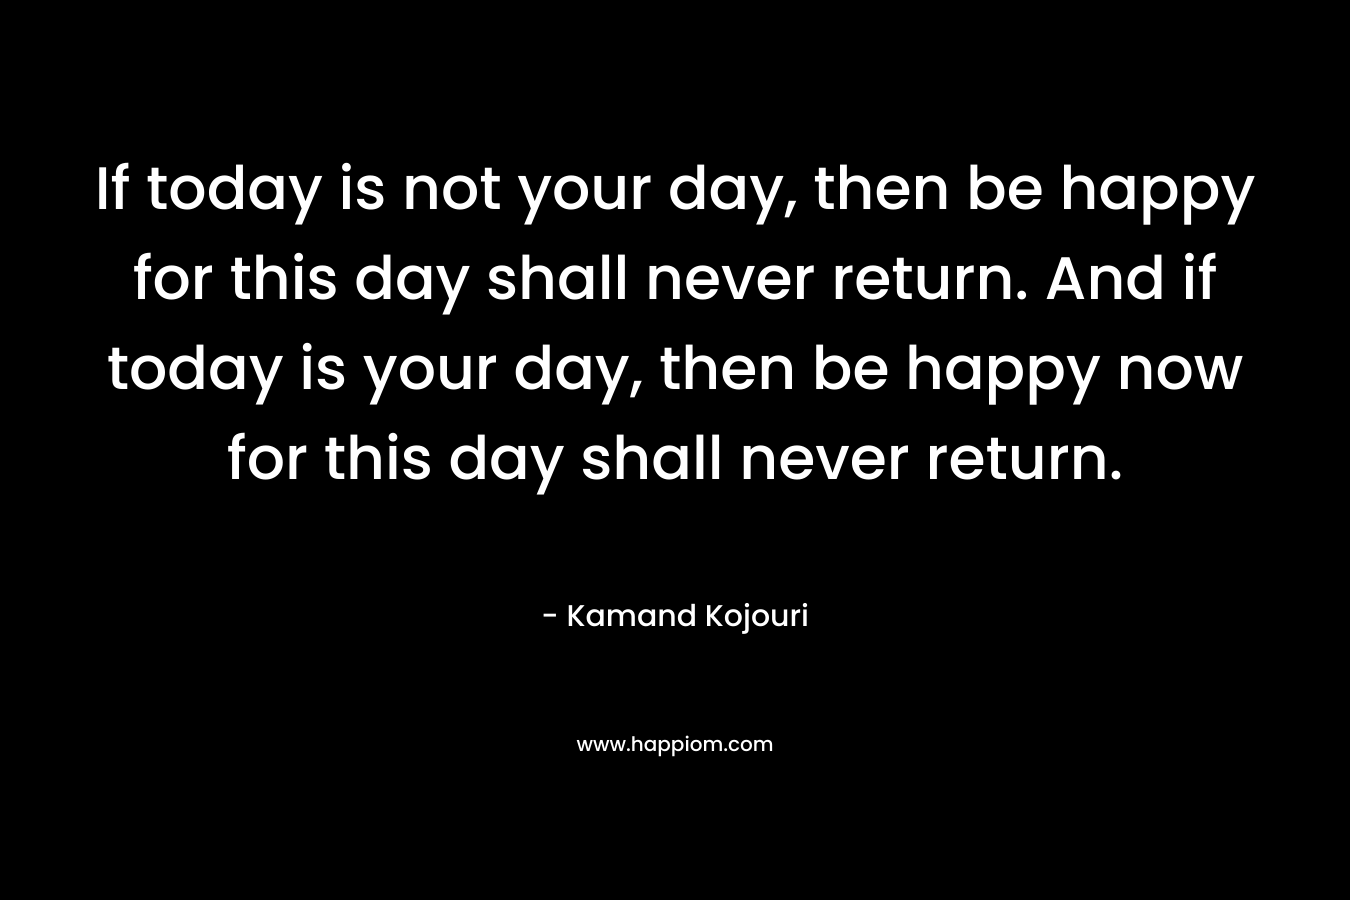 If today is not your day, then be happy for this day shall never return. And if today is your day, then be happy now for this day shall never return.